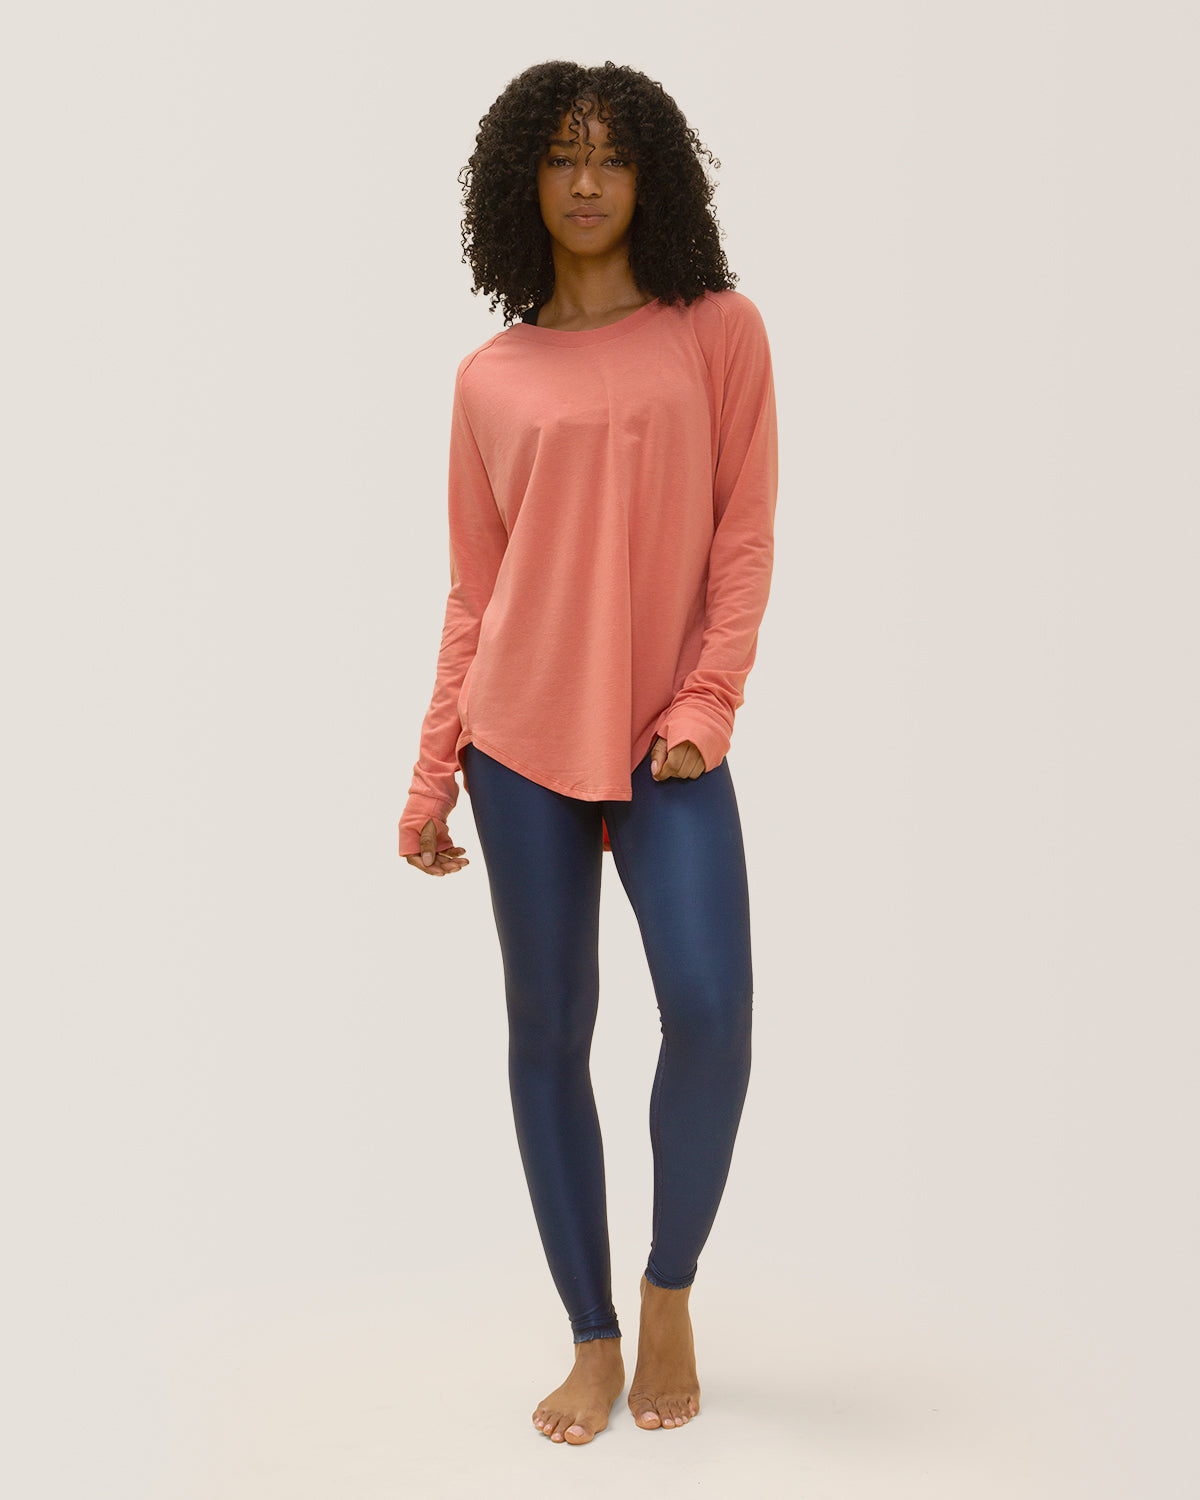 Cozy Long Sleeves Rose Boreal/ Chandail Confo Rose Boreal- Coral / Corail.